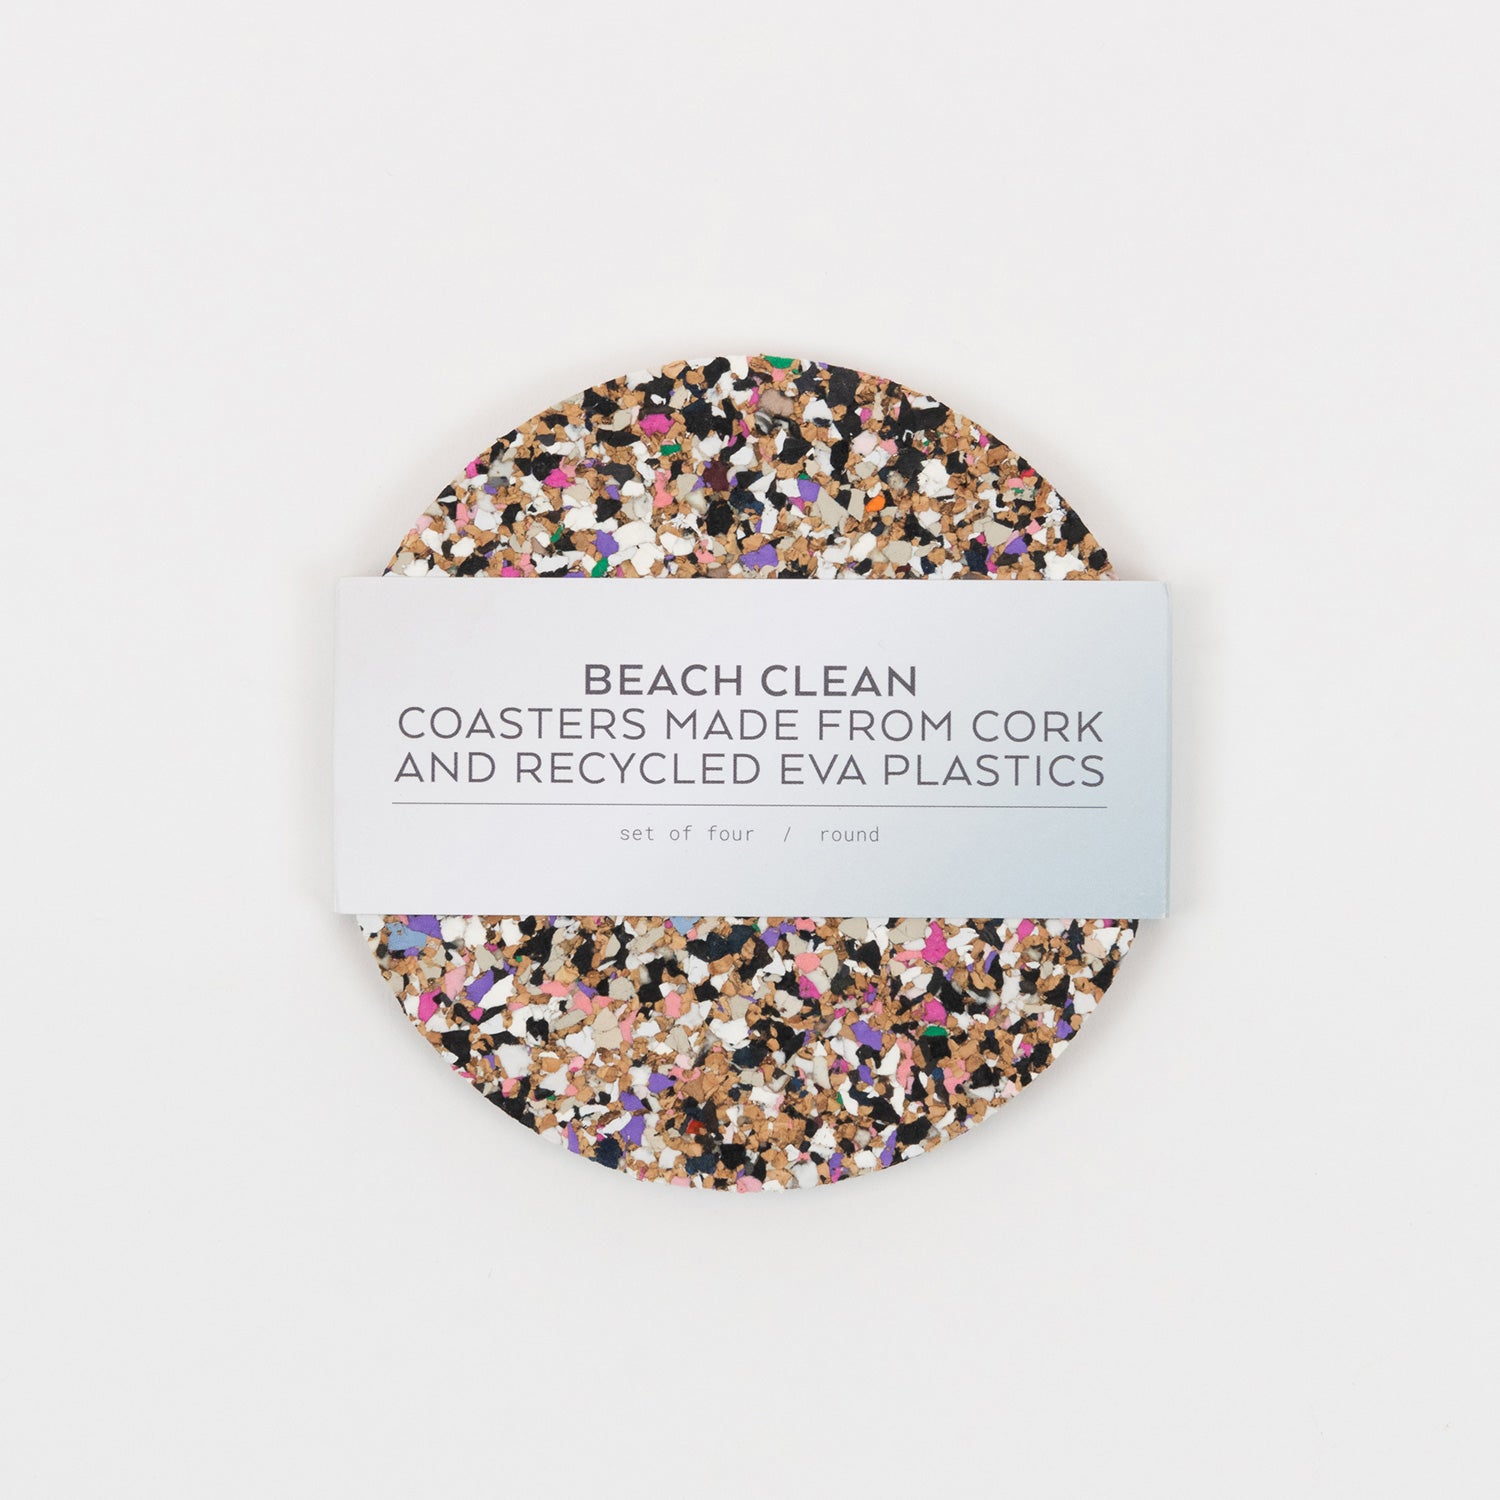 Top down view of the Beach Clean Coasters. The coasters are multi-coloured and the paper packaging goes around the coasters.